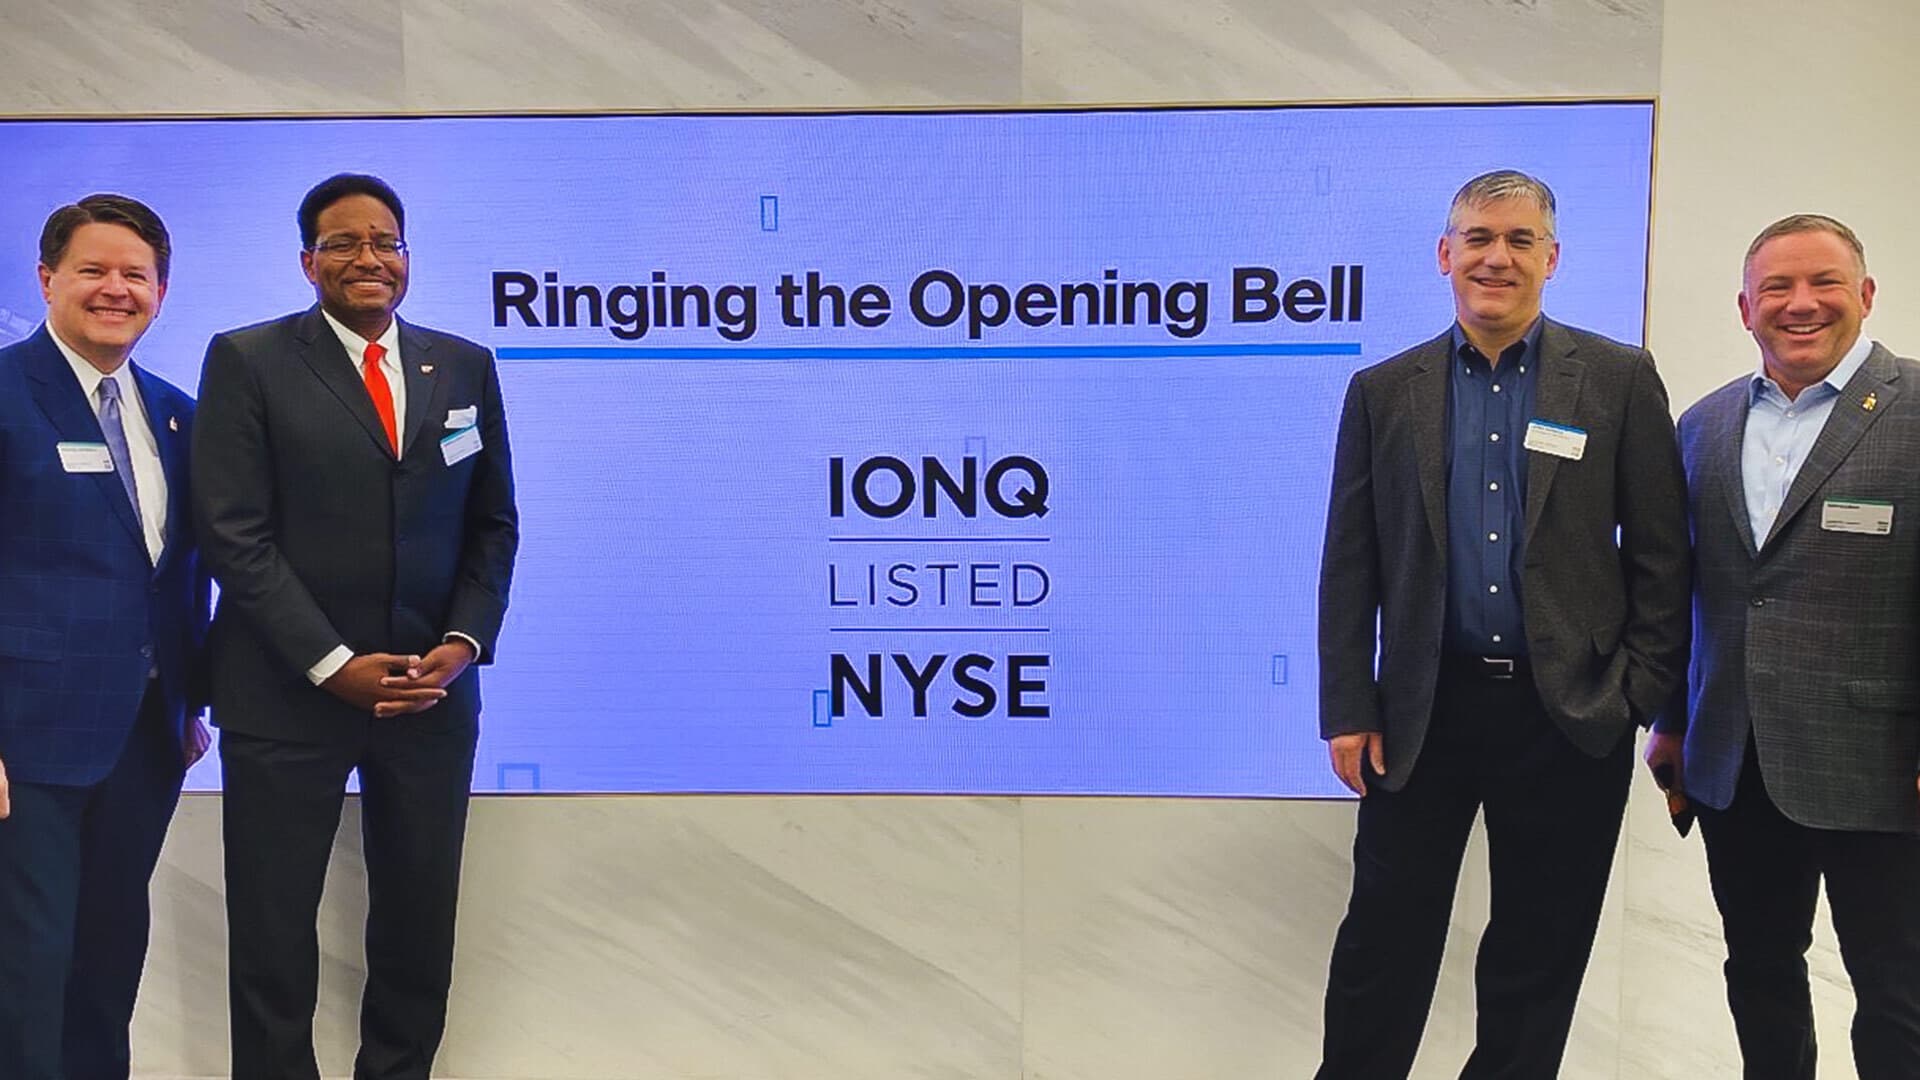 UMD contingent joining IonQ officials at the New York Stock Exchange